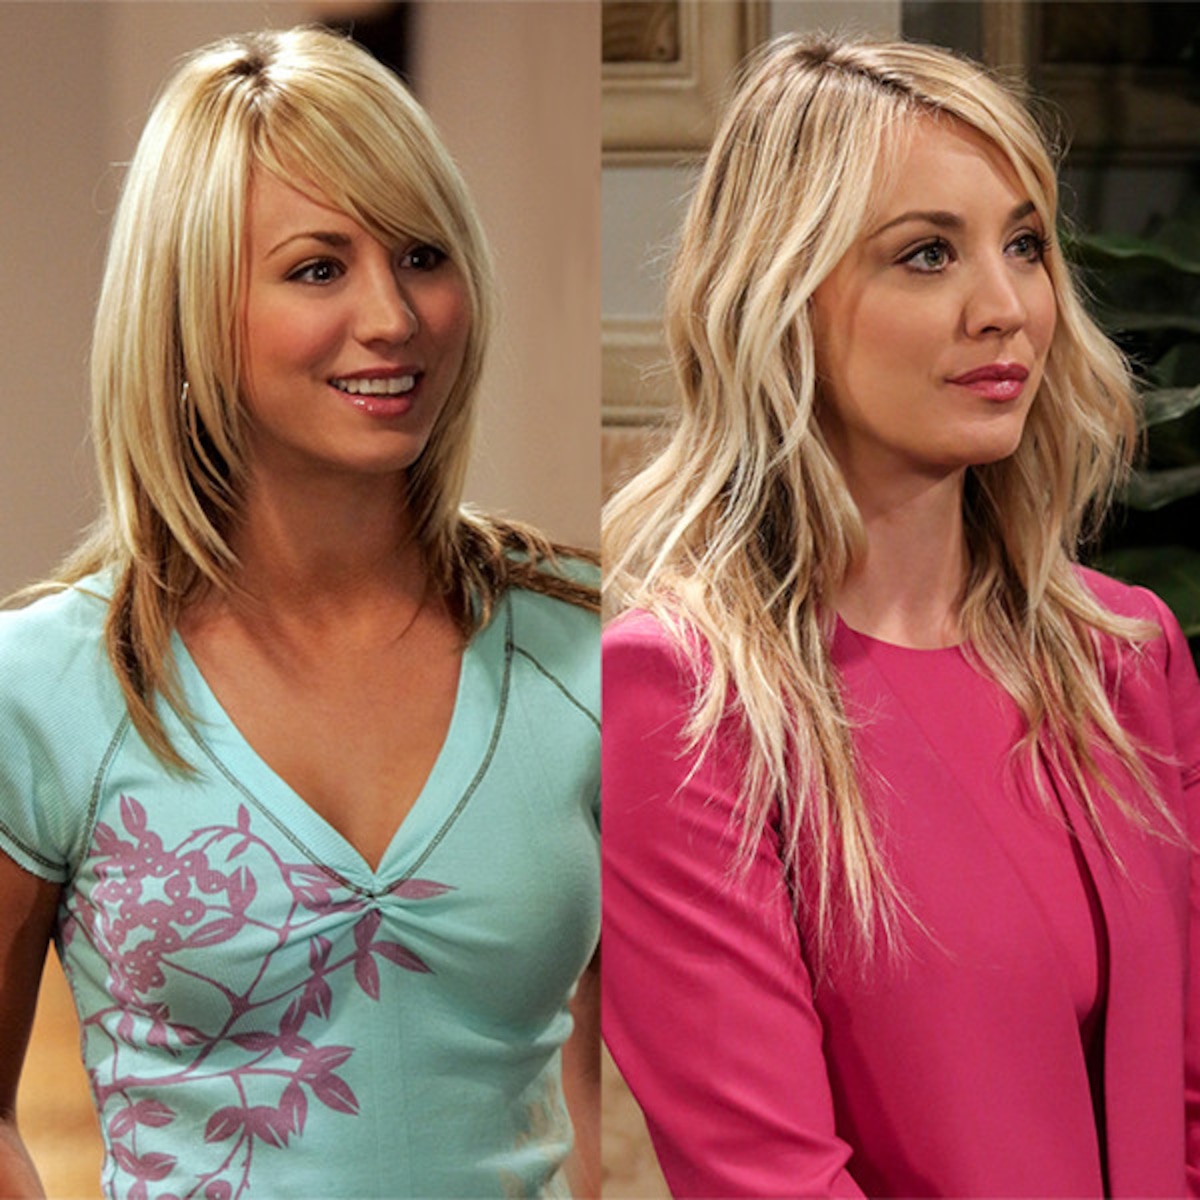 Kaley Cuoco Recalls Being Shocked When Ending Big Bang Theory E Online Deutschland 'the big bang theory' cast celebrates stage dedication at warner brothers studios. kaley cuoco recalls being shocked